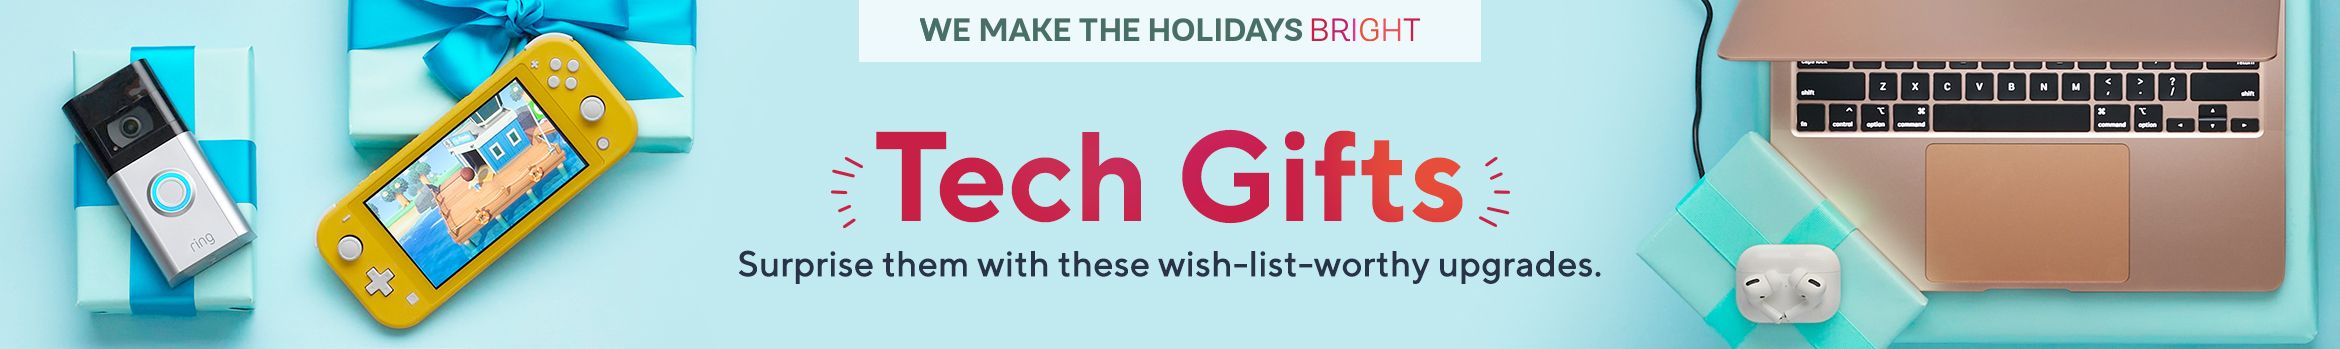 We Make the Holidays Bright.  Tech Gifts.  Surprise them with these wish-list-worthy upgrades.